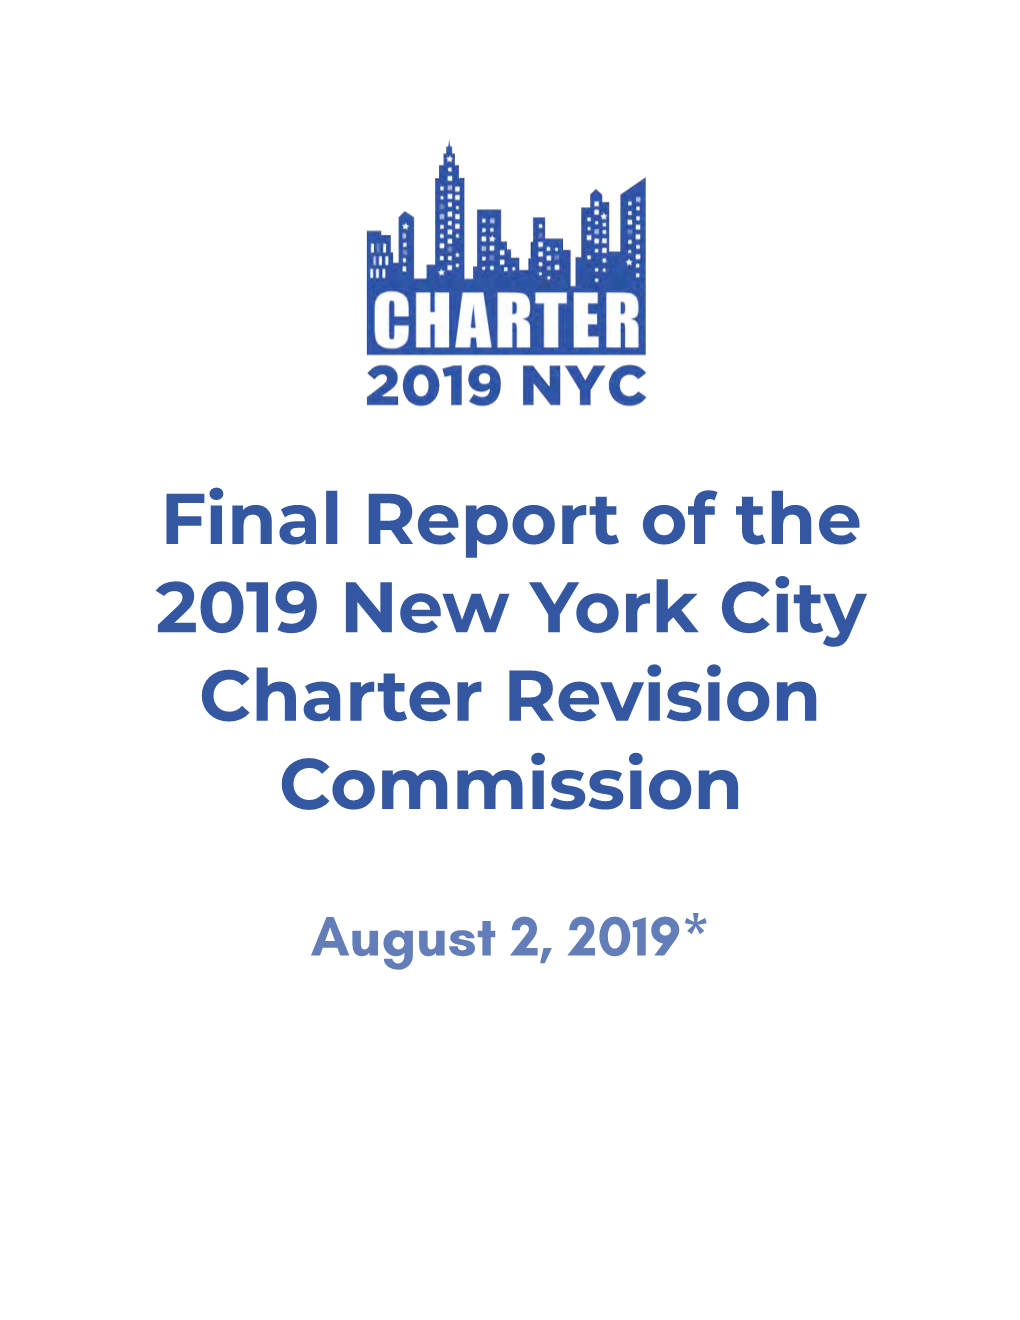 Final Report of the 2019 New York City Charter Revision Commission